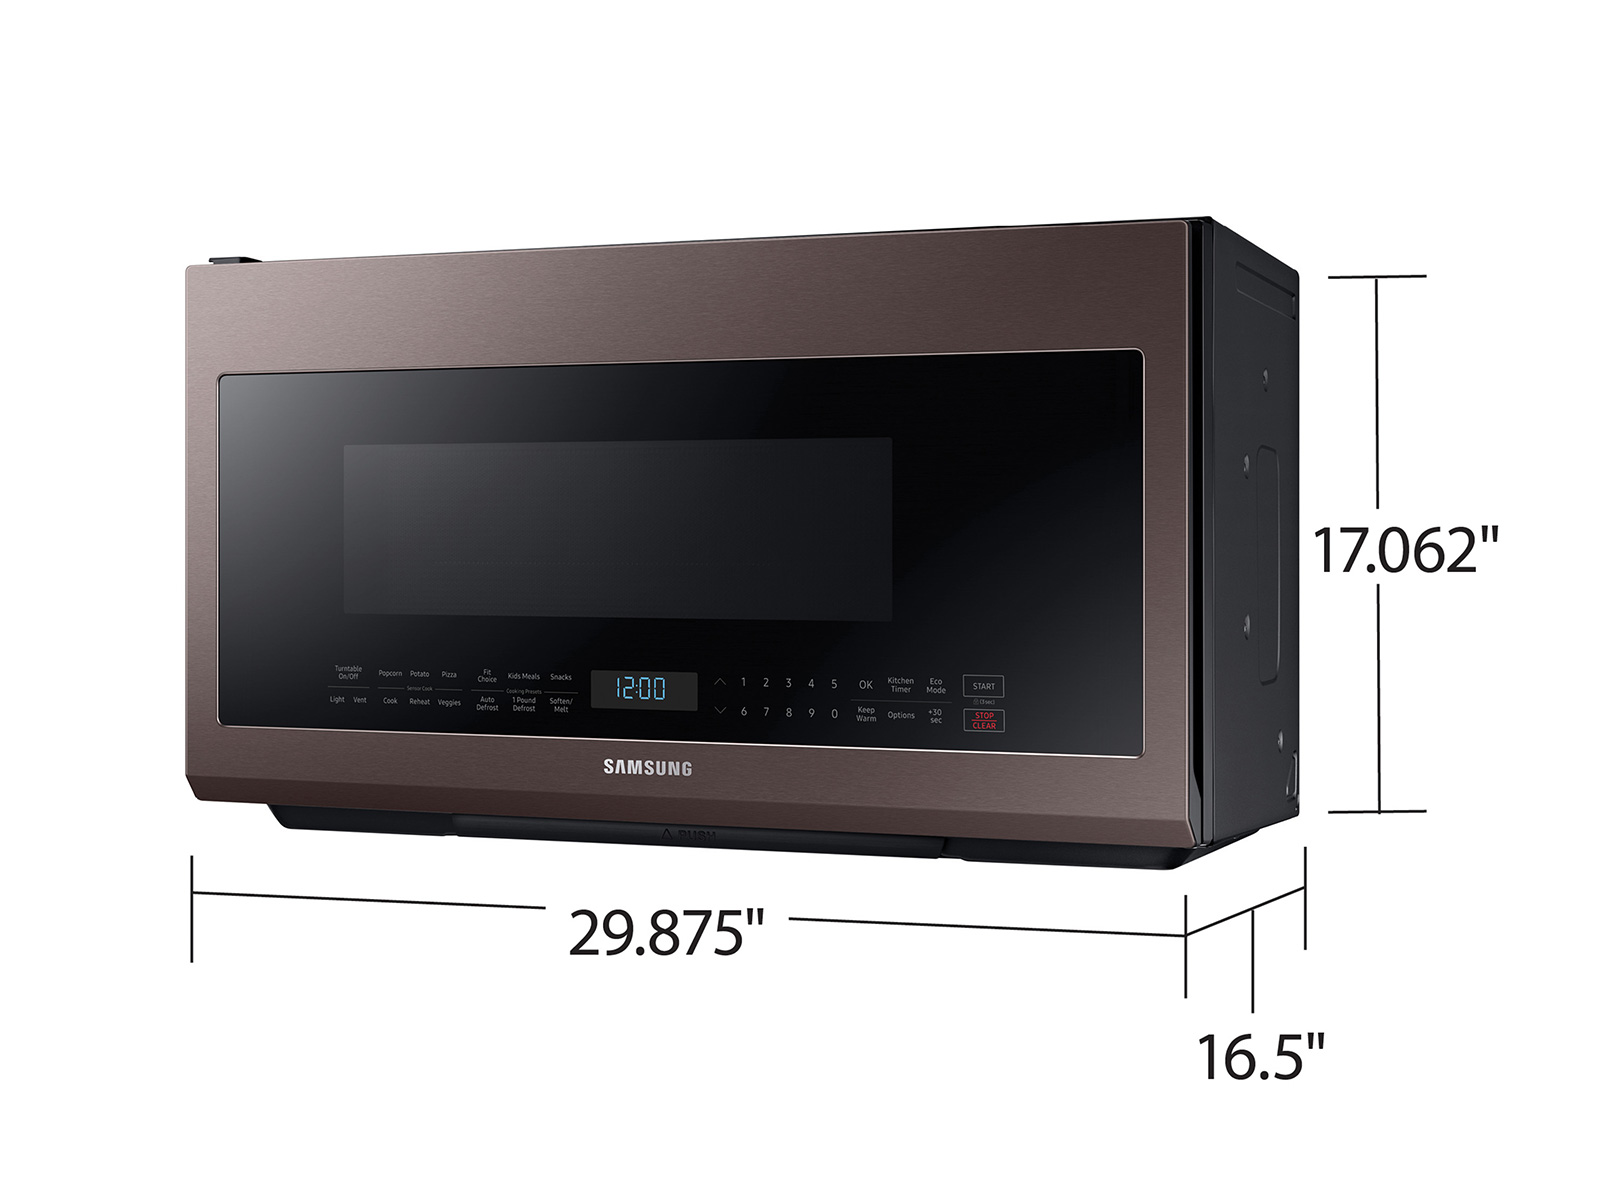 Thumbnail image of Bespoke Over-the-Range Microwave 2.1 cu. ft. with Sensor Cooking in Fingerprint Resistant Tuscan Stainless Steel